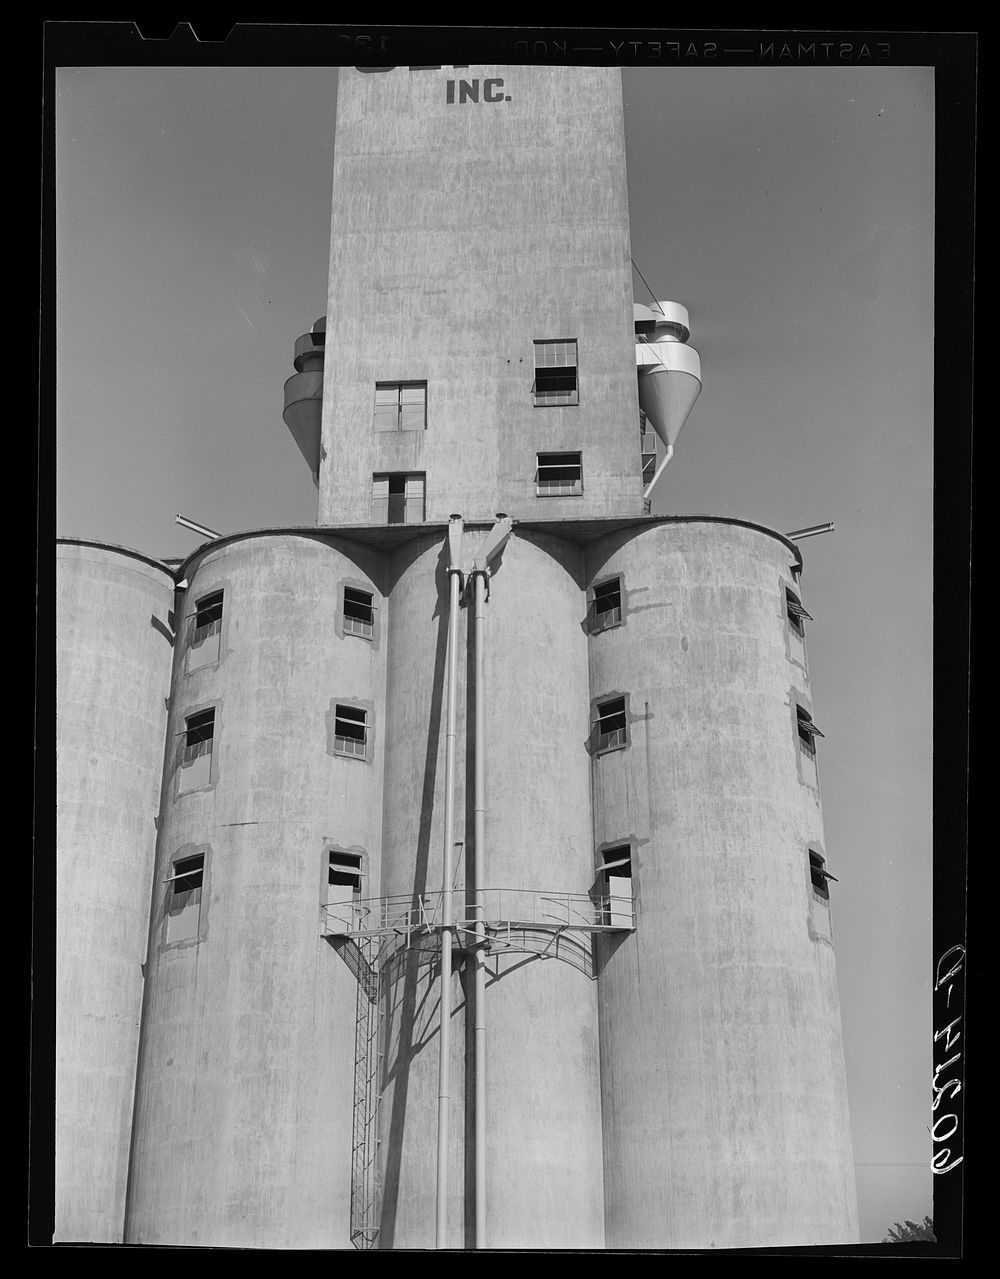 Concrete grain elevator. Minneapolis, Minnesota. Sourced from the Library of Congress.